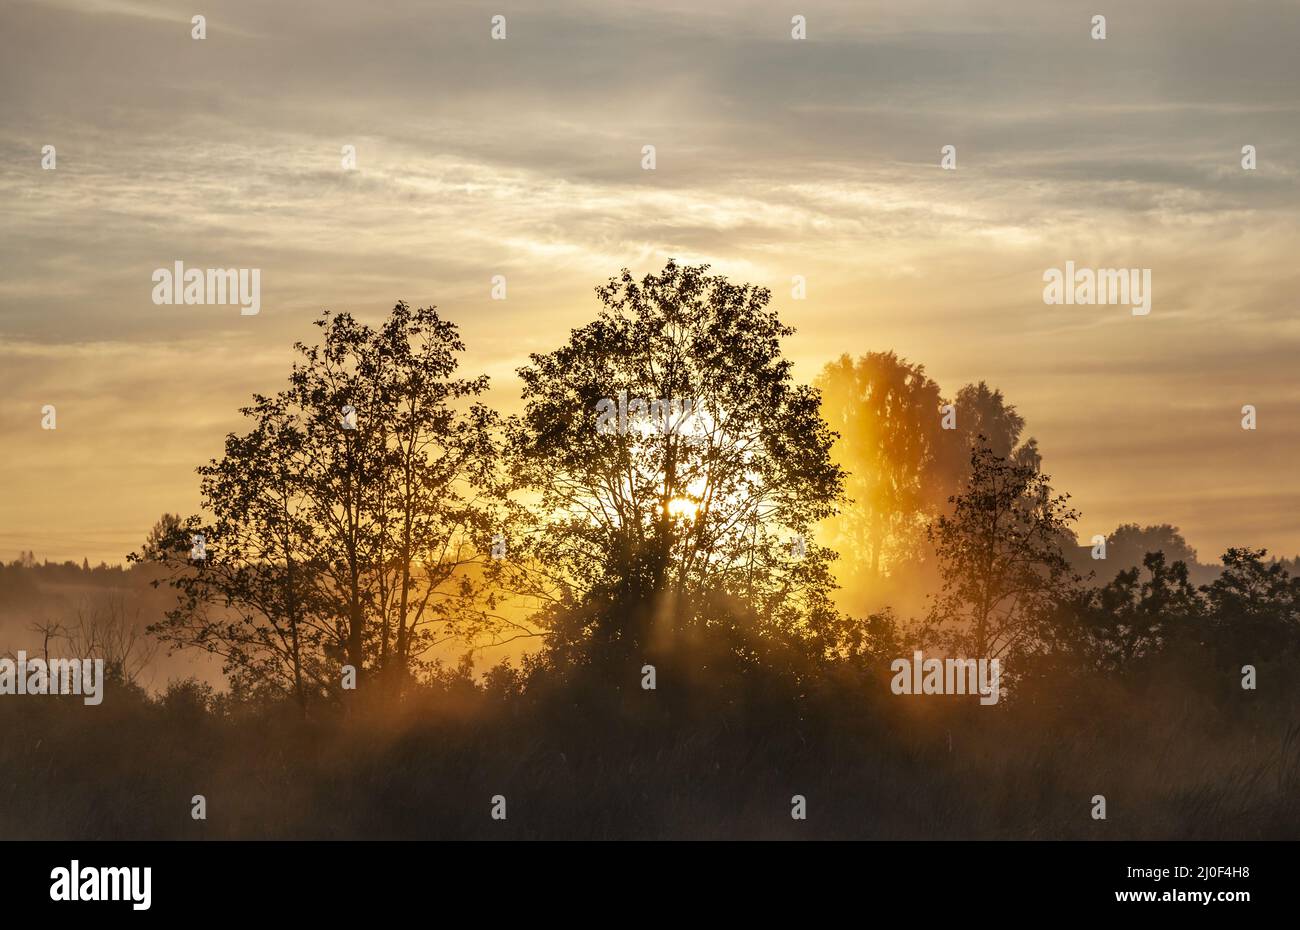 Sunlight penetrates tree branches during sunrise Stock Photo